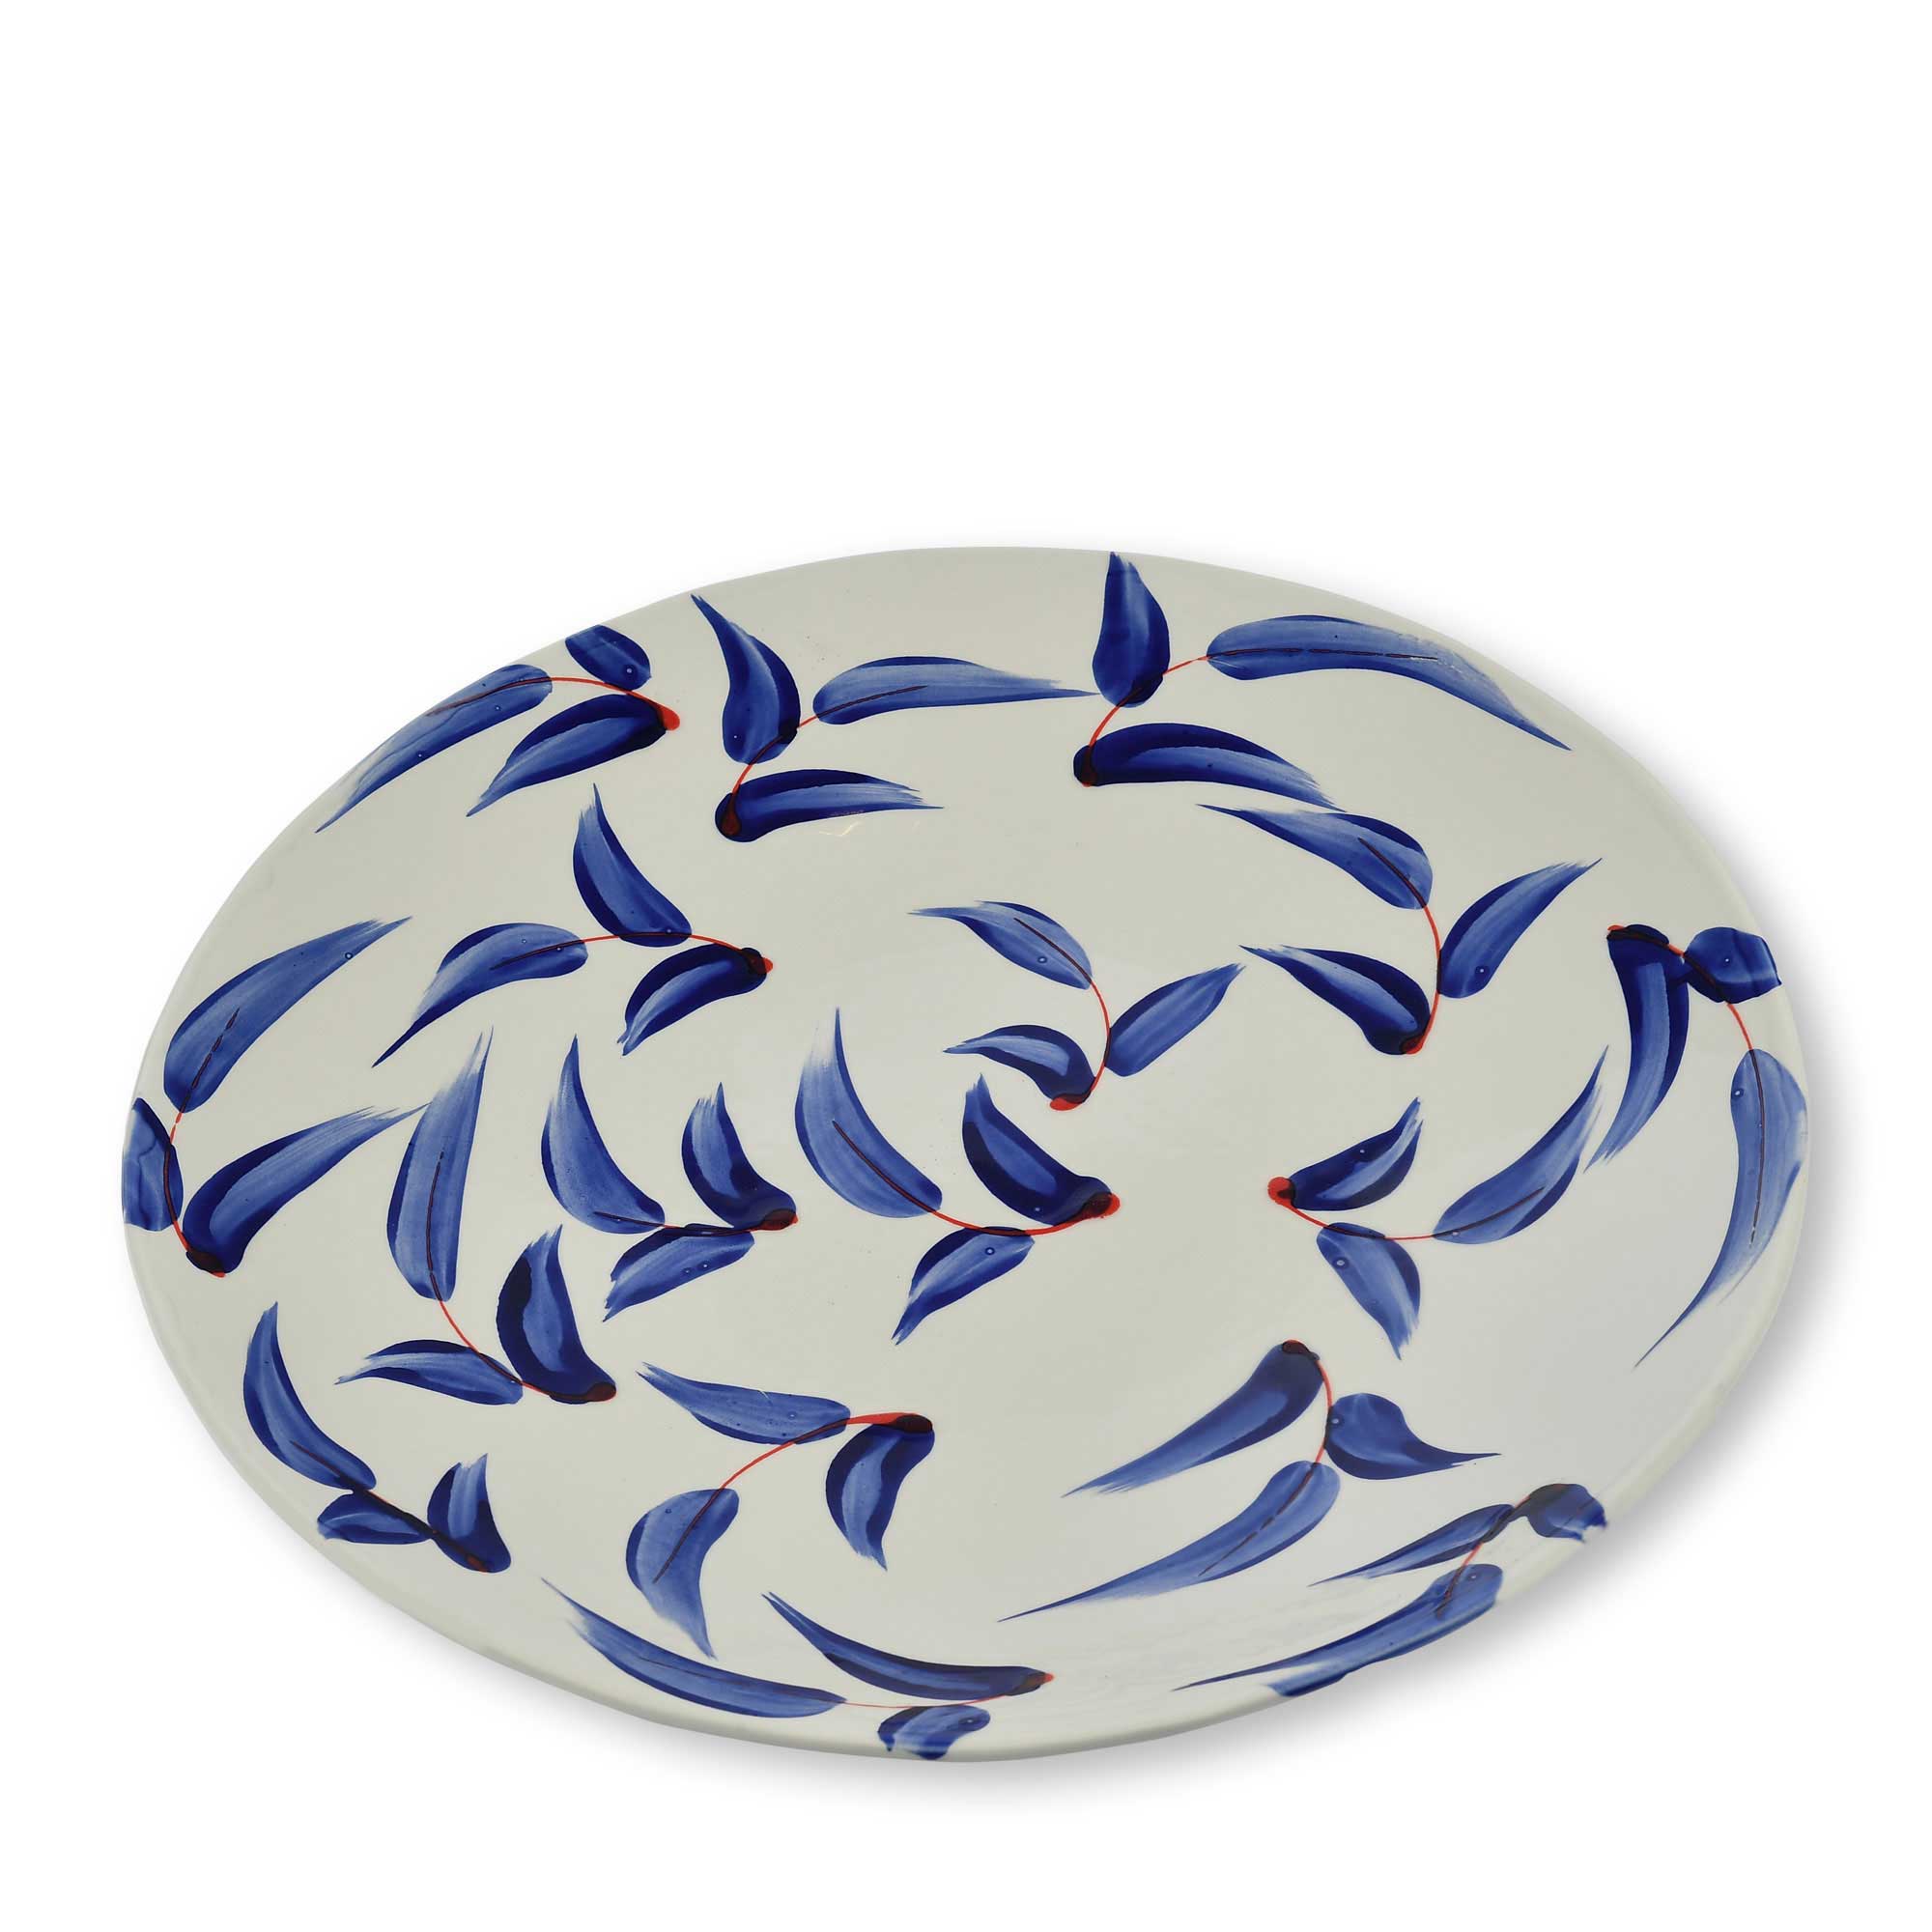 Ceramic%20Round%20Serving%20Dish%20With%20Three%20Leaves%20Motifs image 1